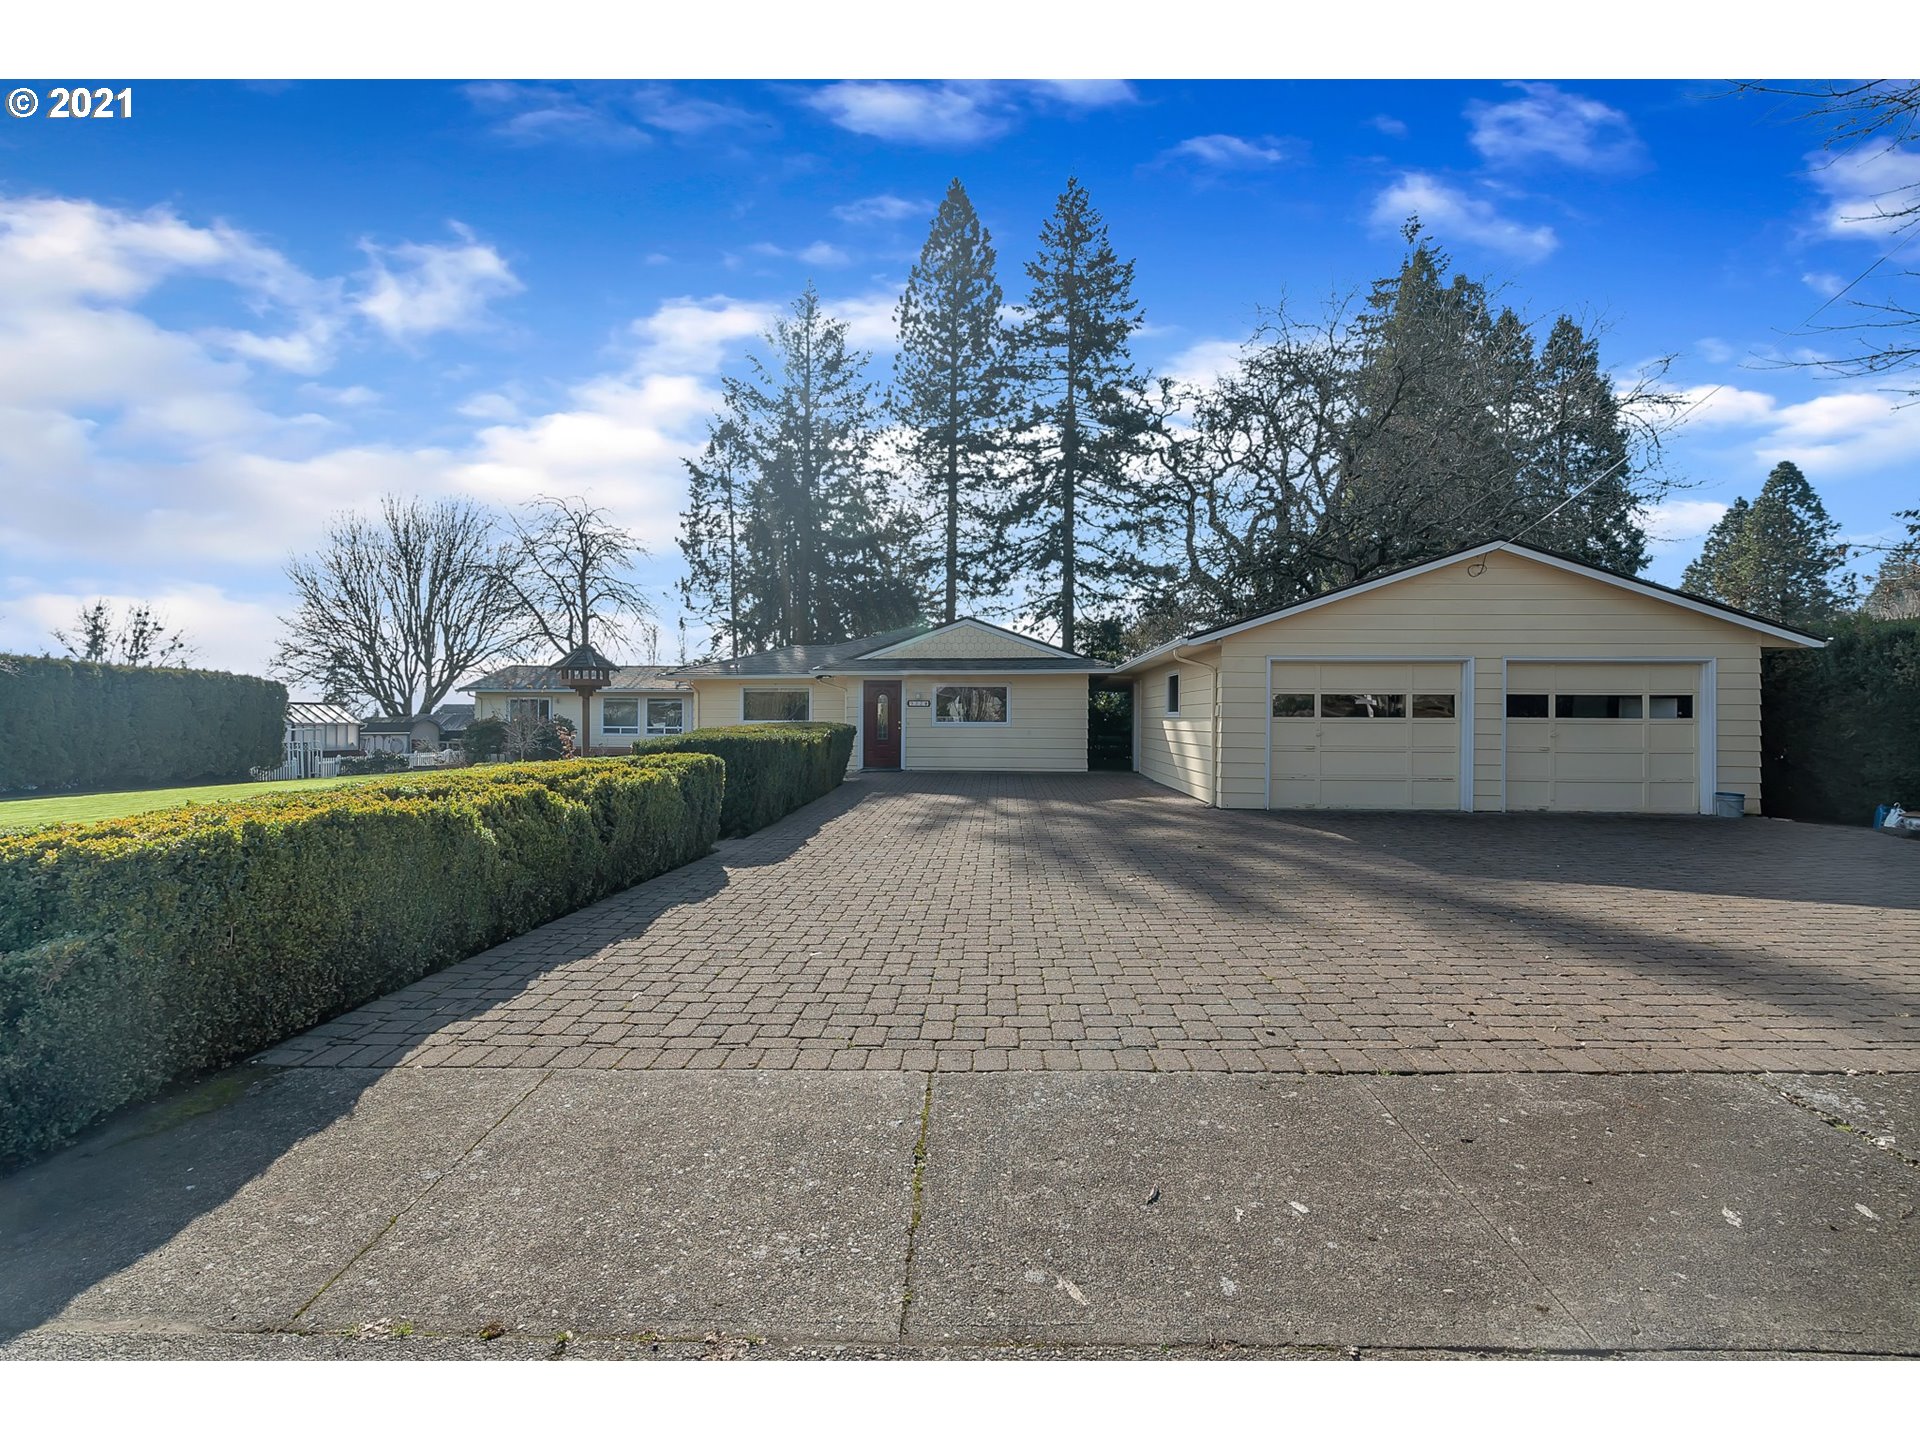 932 LEFOR DR NW (1 of 29)